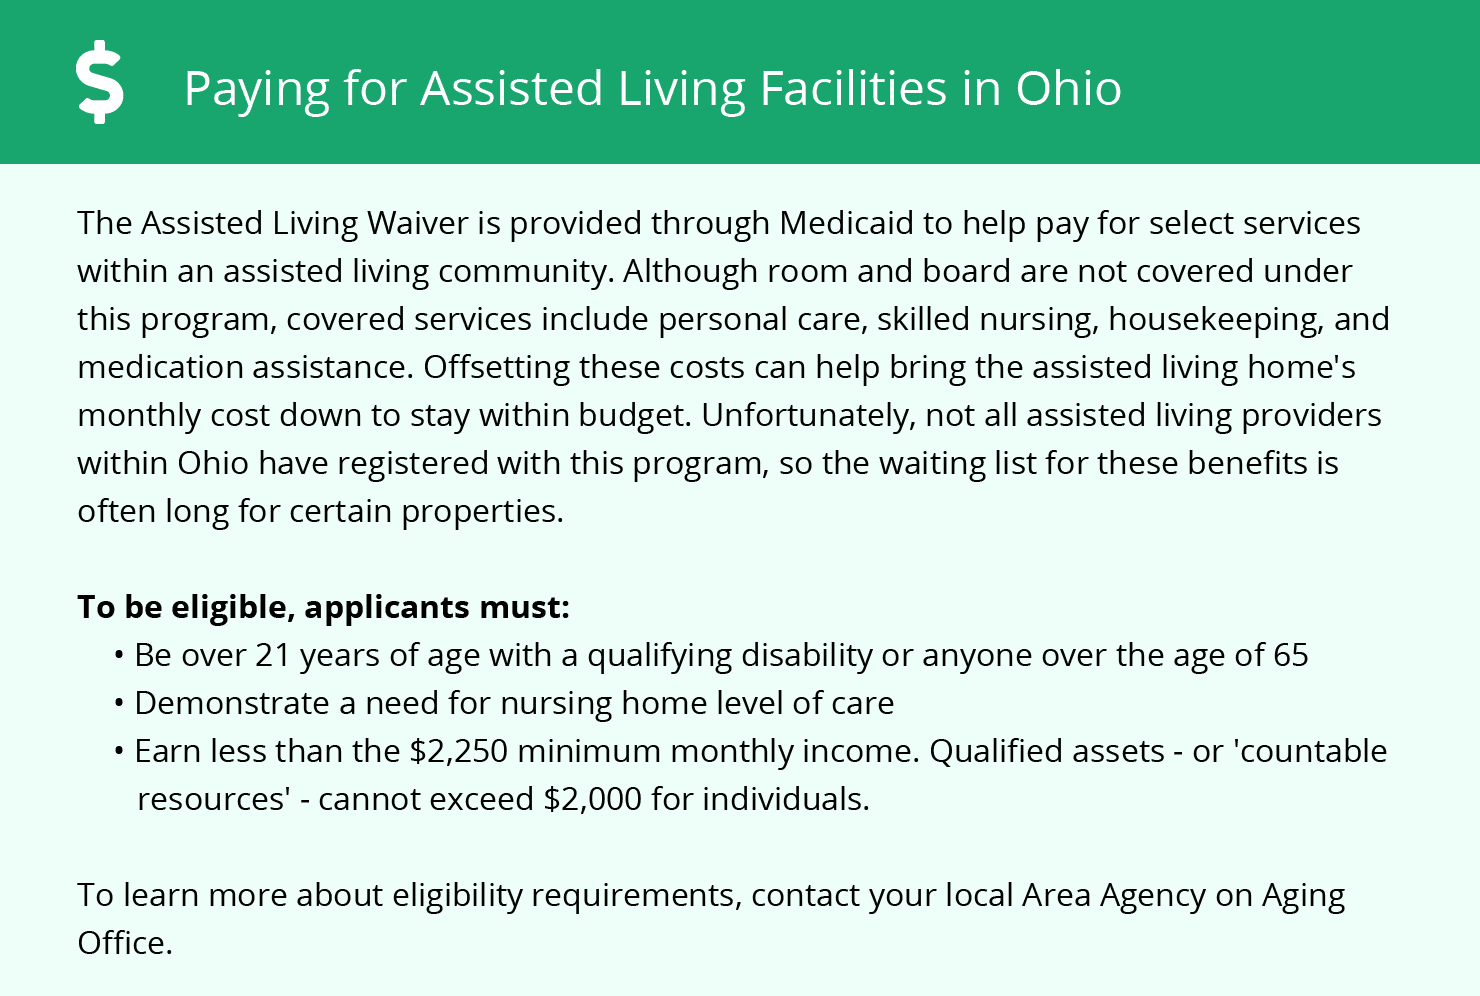 Paying for Assisted Living Facilities in Ohio